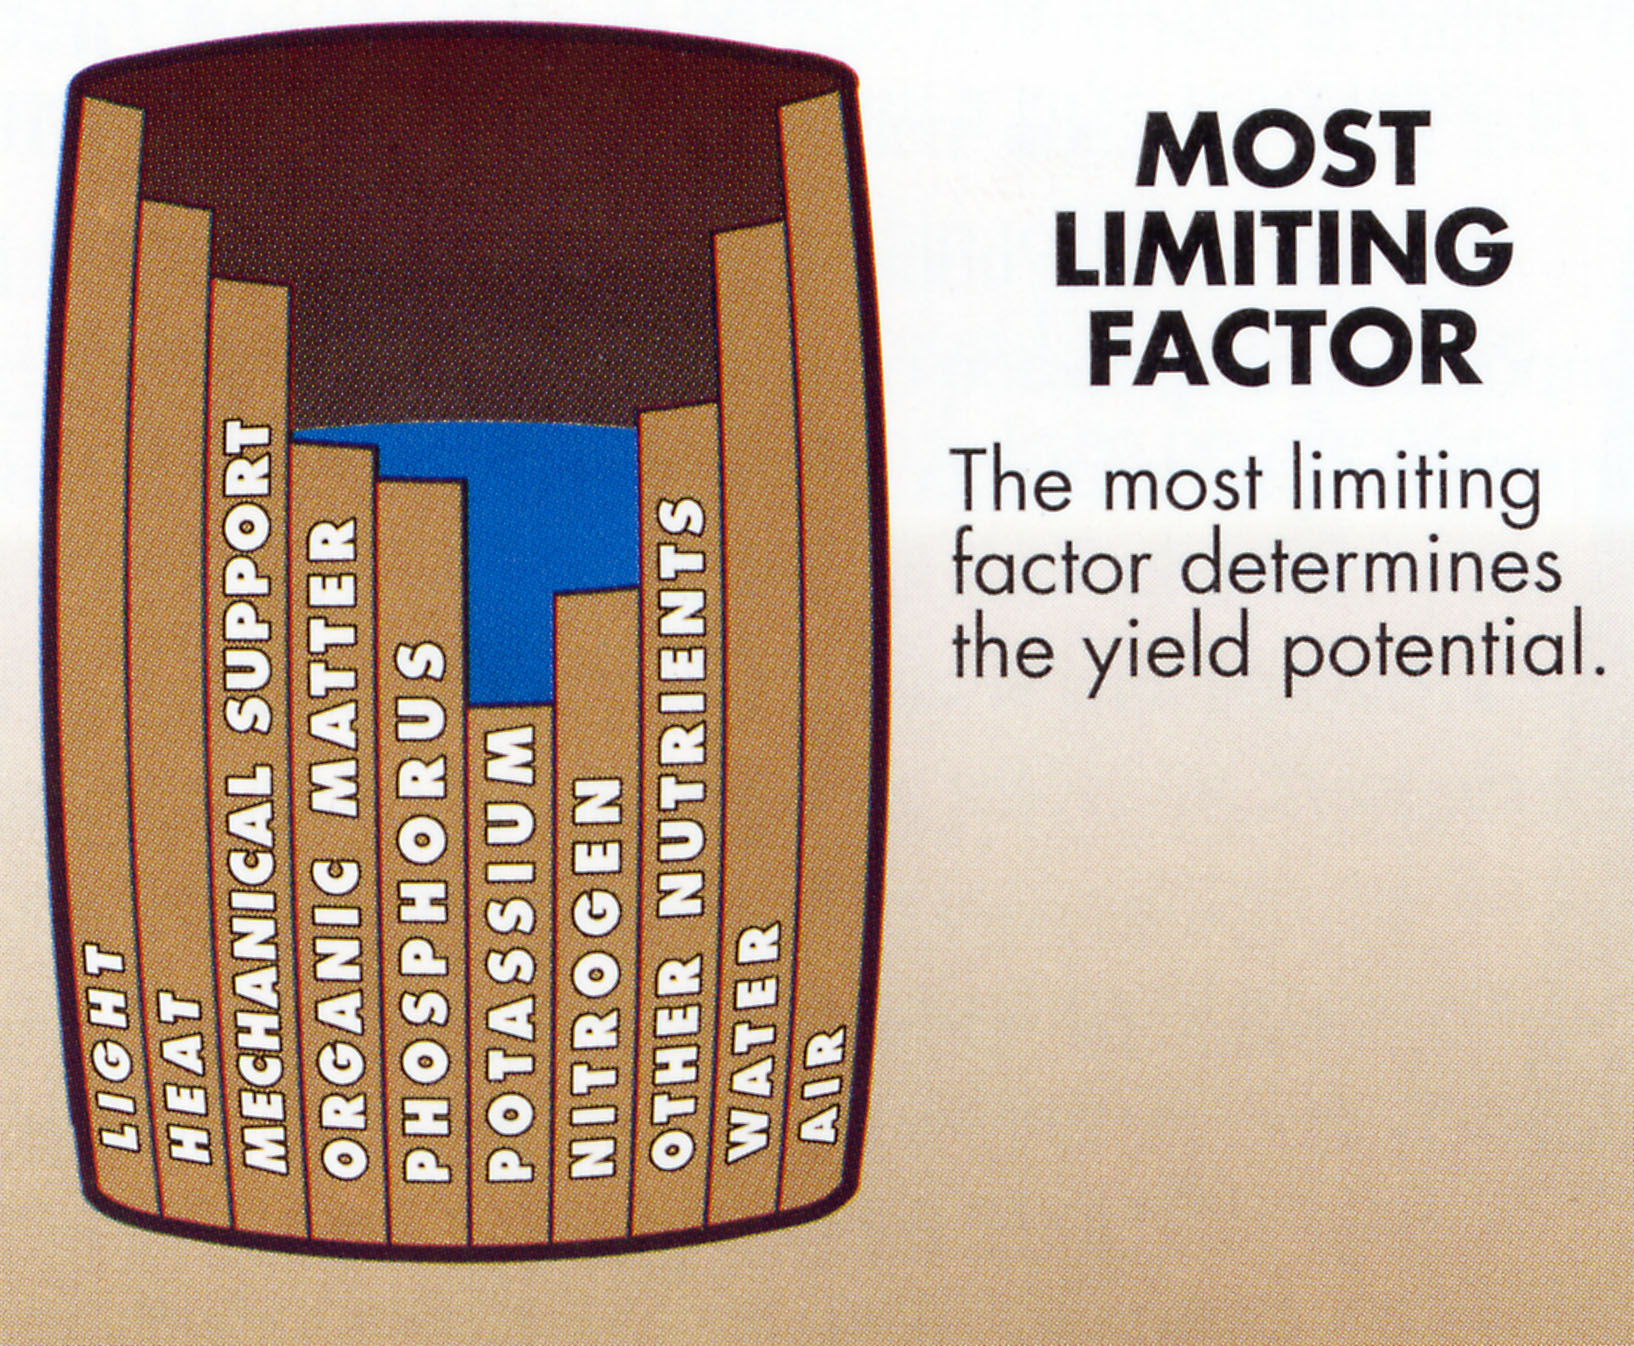 Most limiting factor determins the yield potential